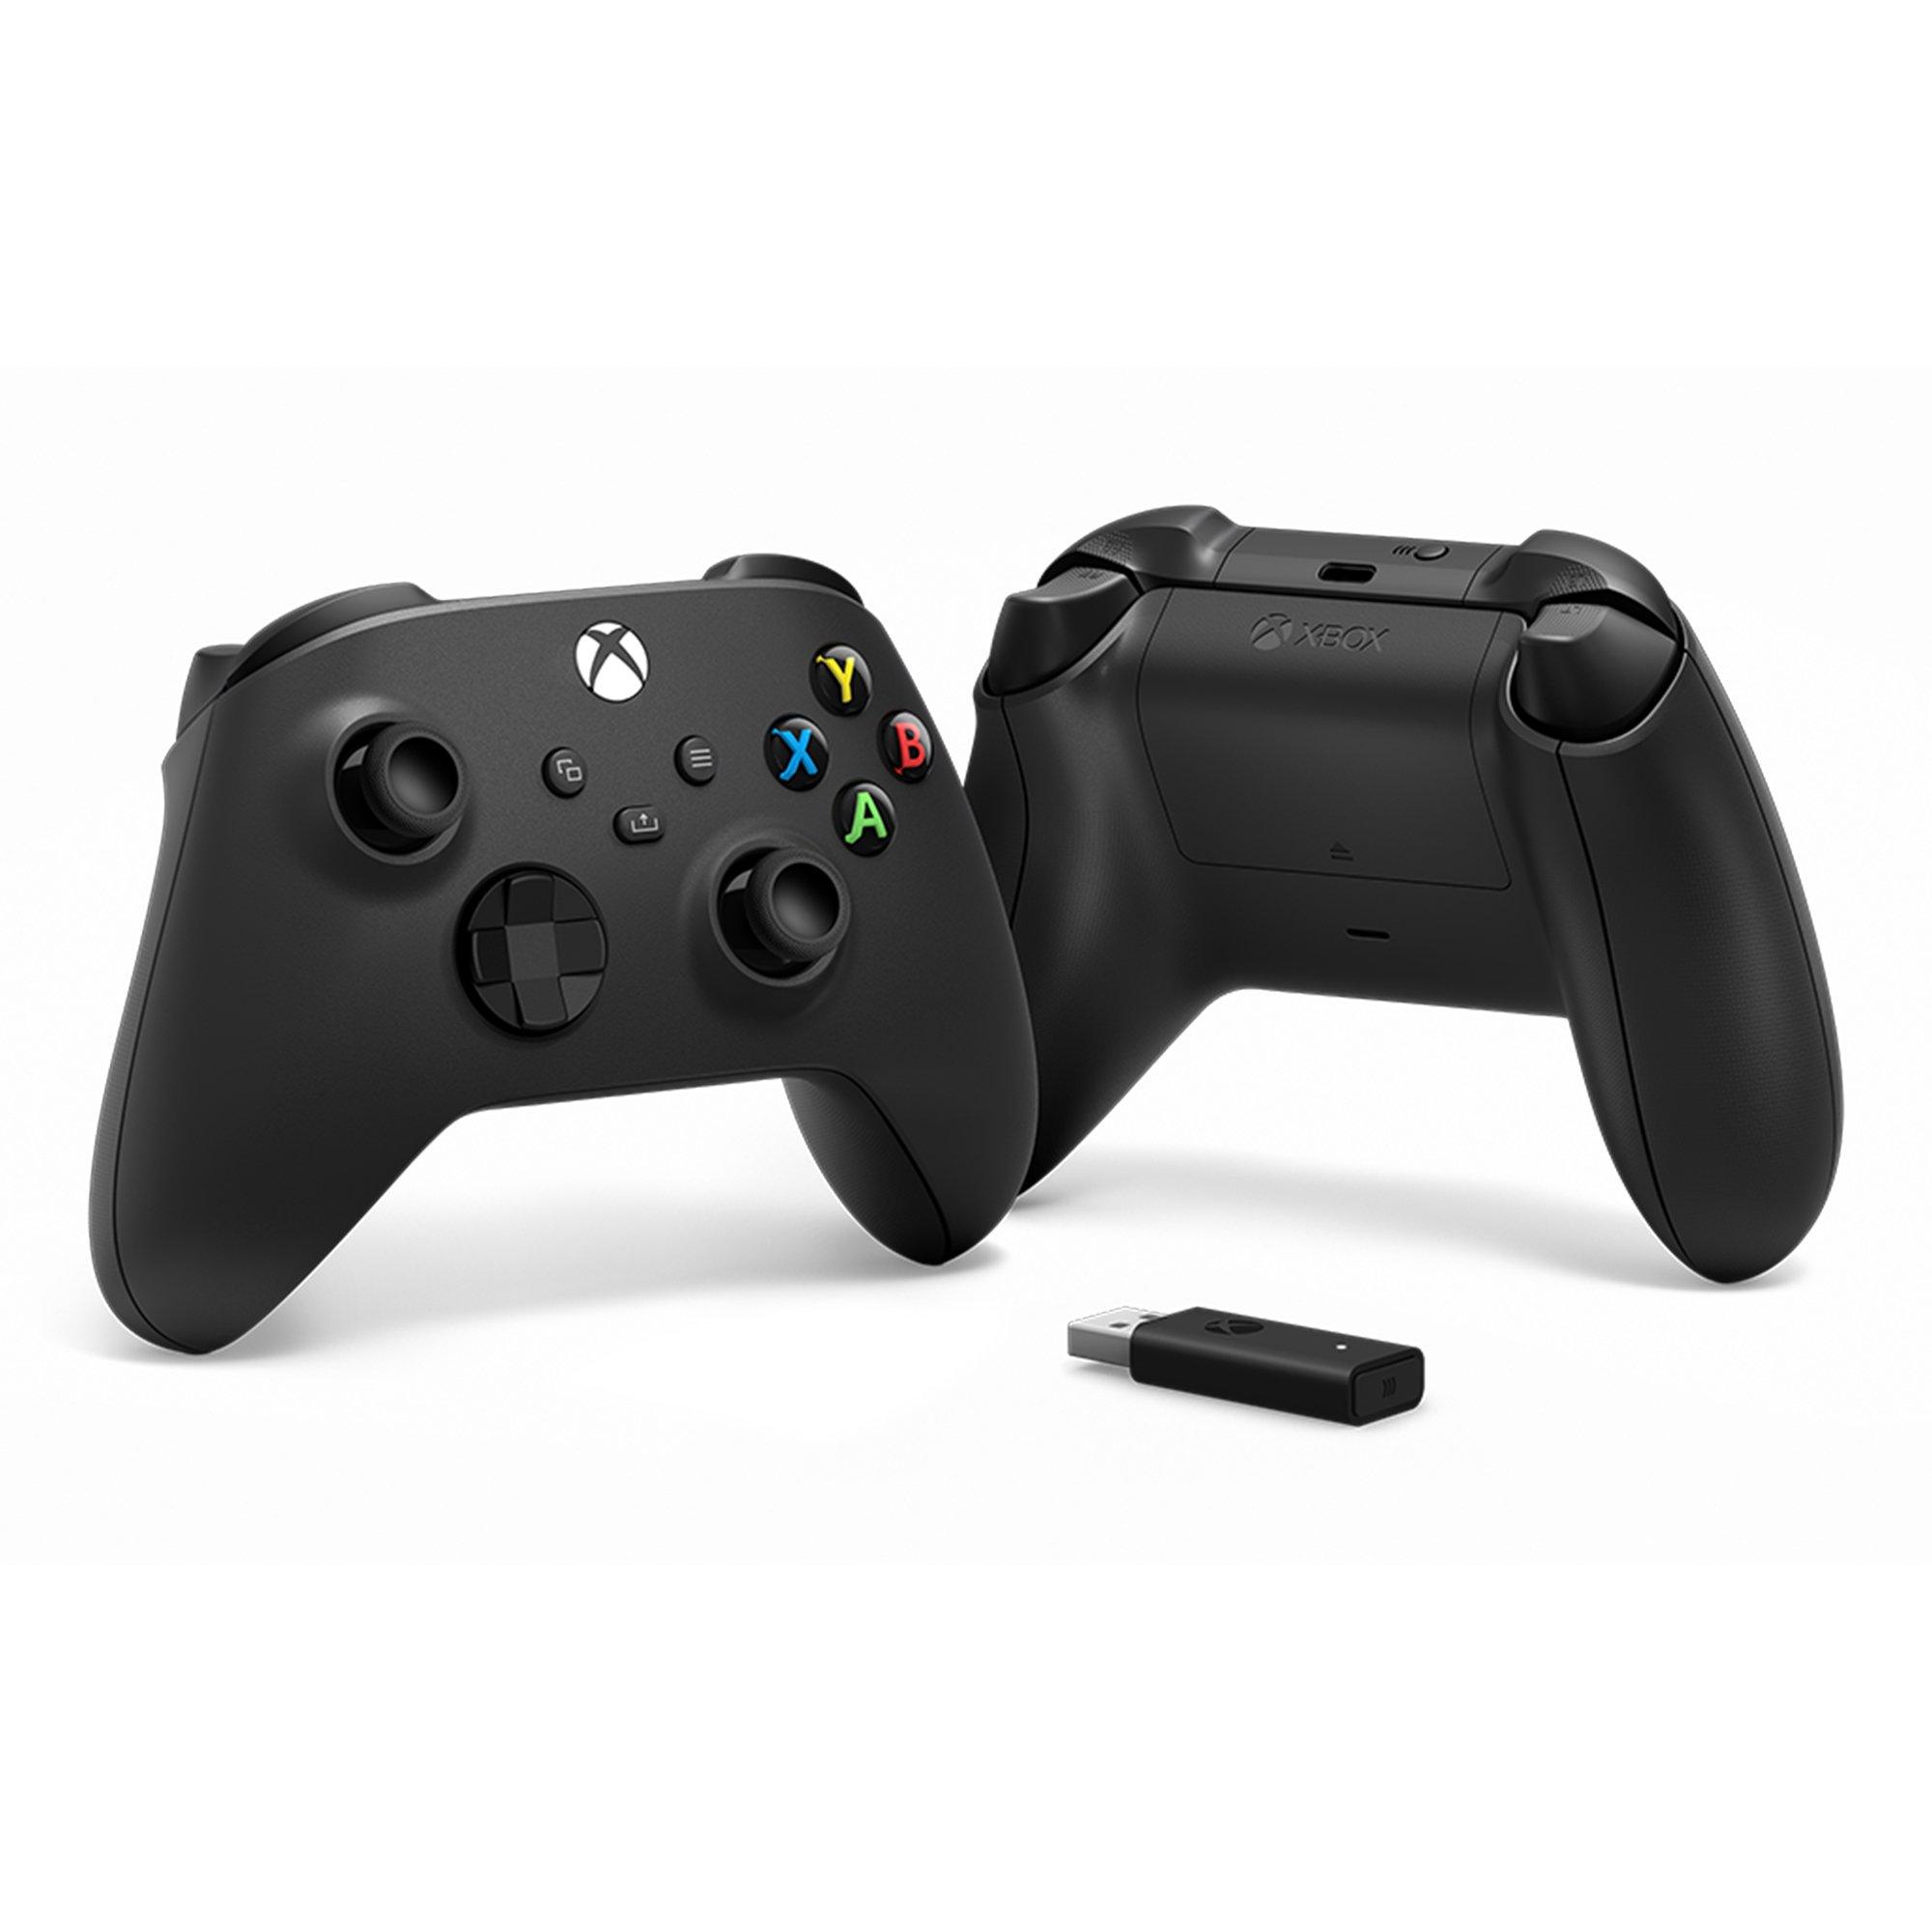 Power Injustice Bishop Microsoft Xbox Series X Wireless Controller with Wireless Adapter for  Windows 10